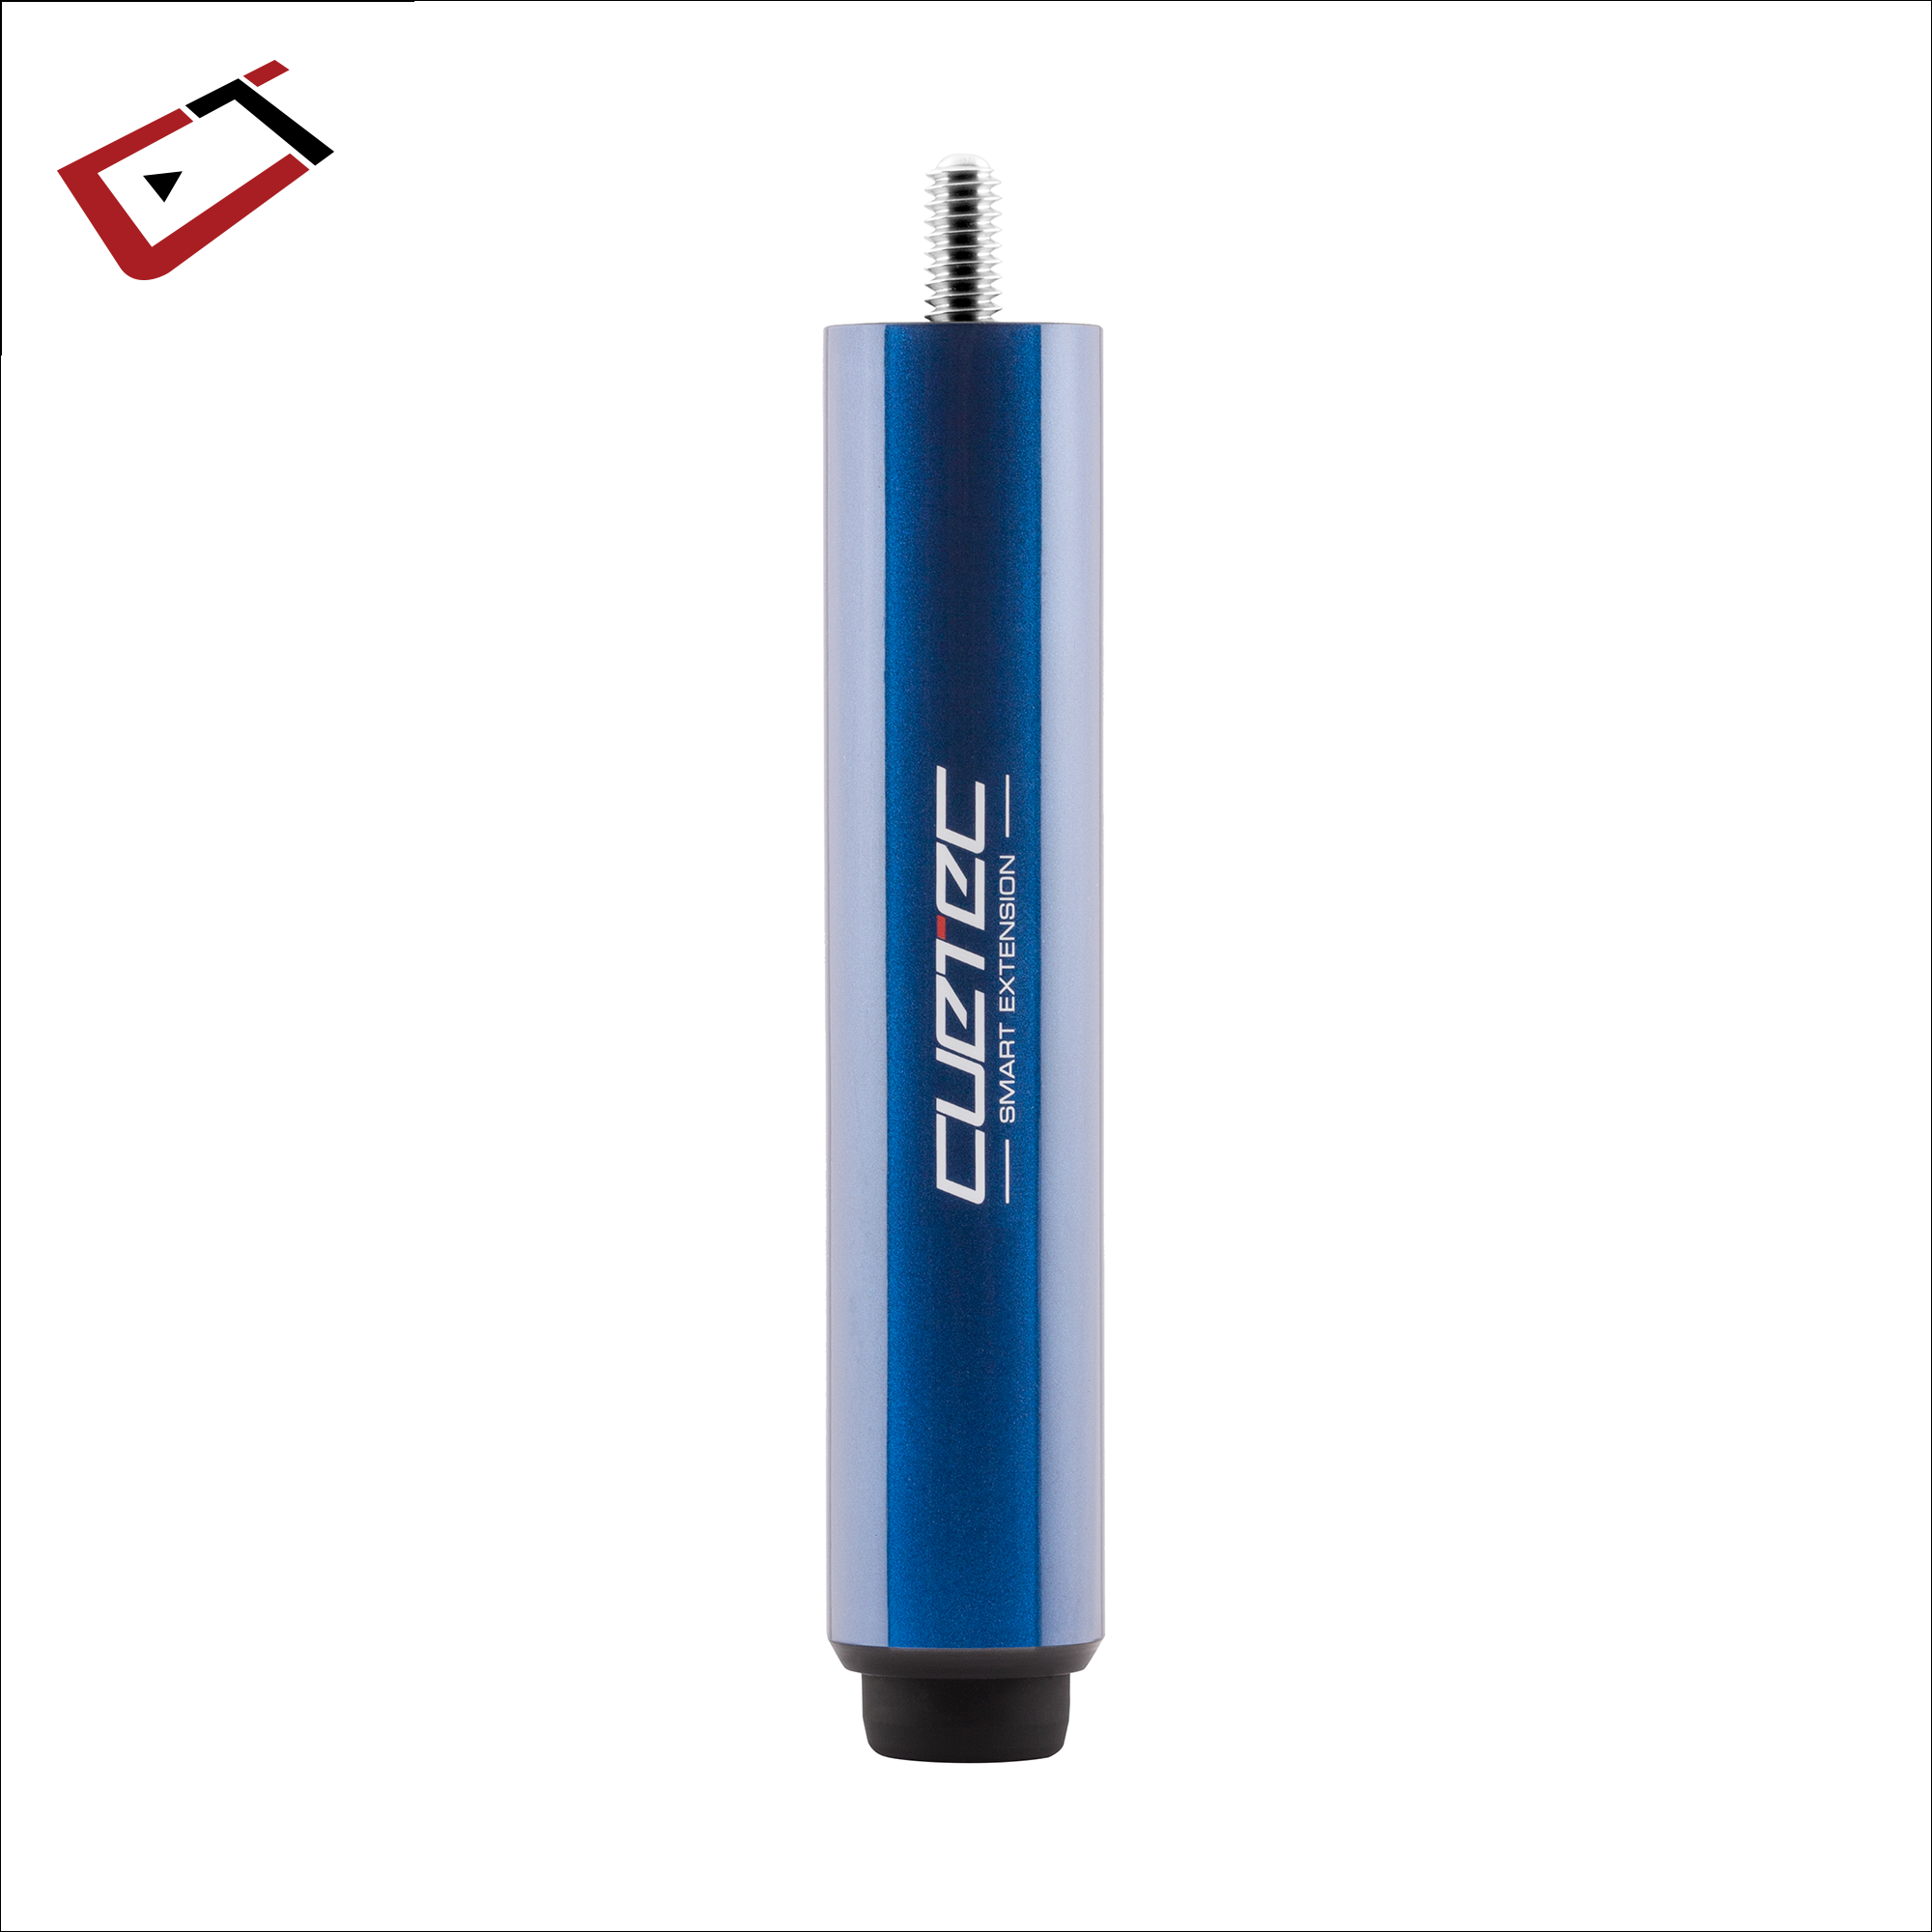 Blue Cuetec Pool Cue Smart Extension 17-7305 Adds 6 inches 